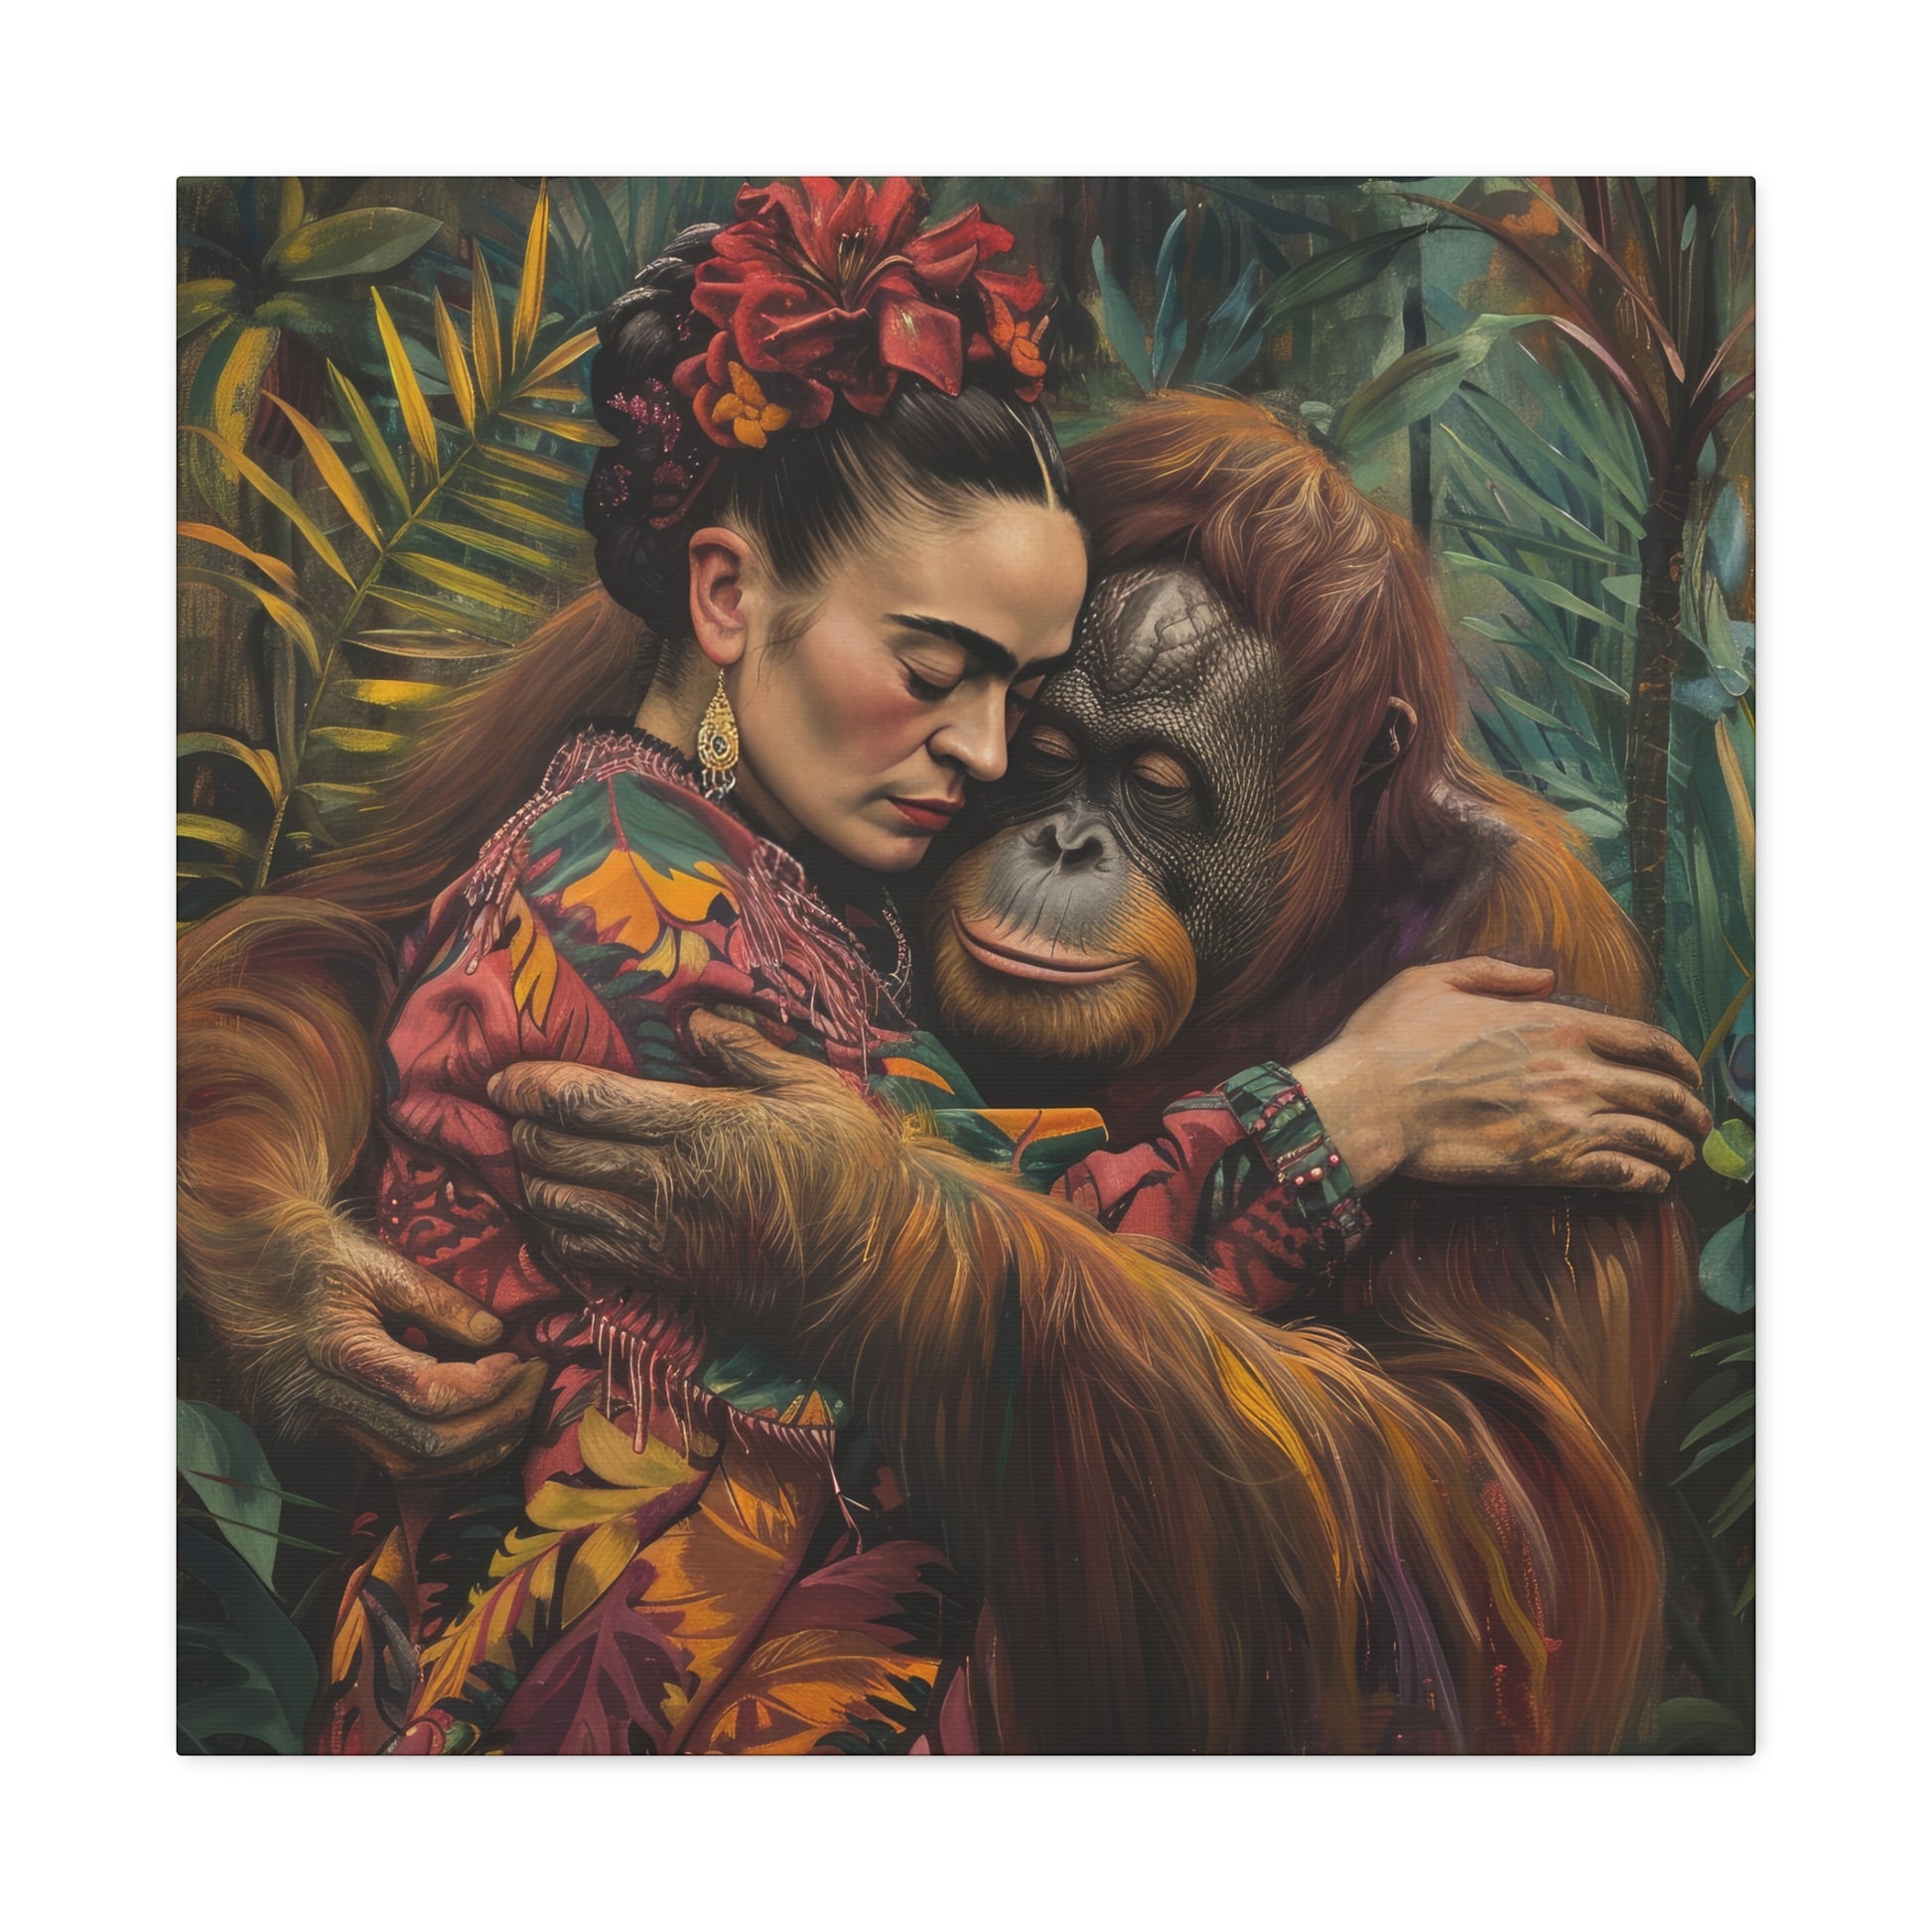 A woman and an orangutan in a heartfelt embrace amidst a tropical background, depicted on a vibrant Printify canvas print of the David Miller Embrace of the Wild.